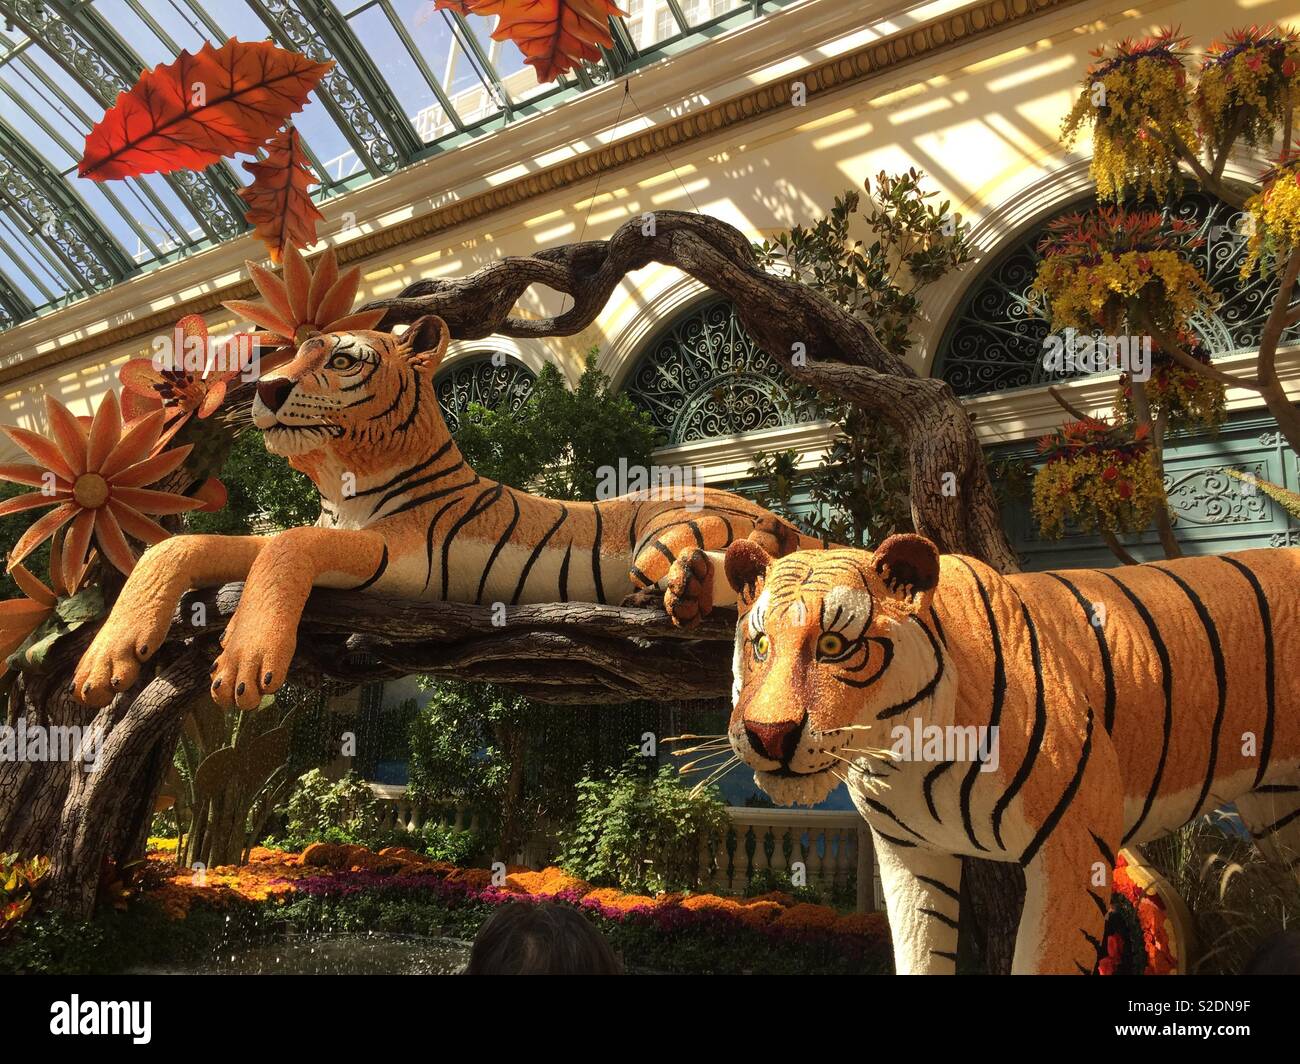 Bellagio Conservatory's new display: 'Eye of the Tiger' honors Asian  culture — PHOTOS, The Strip